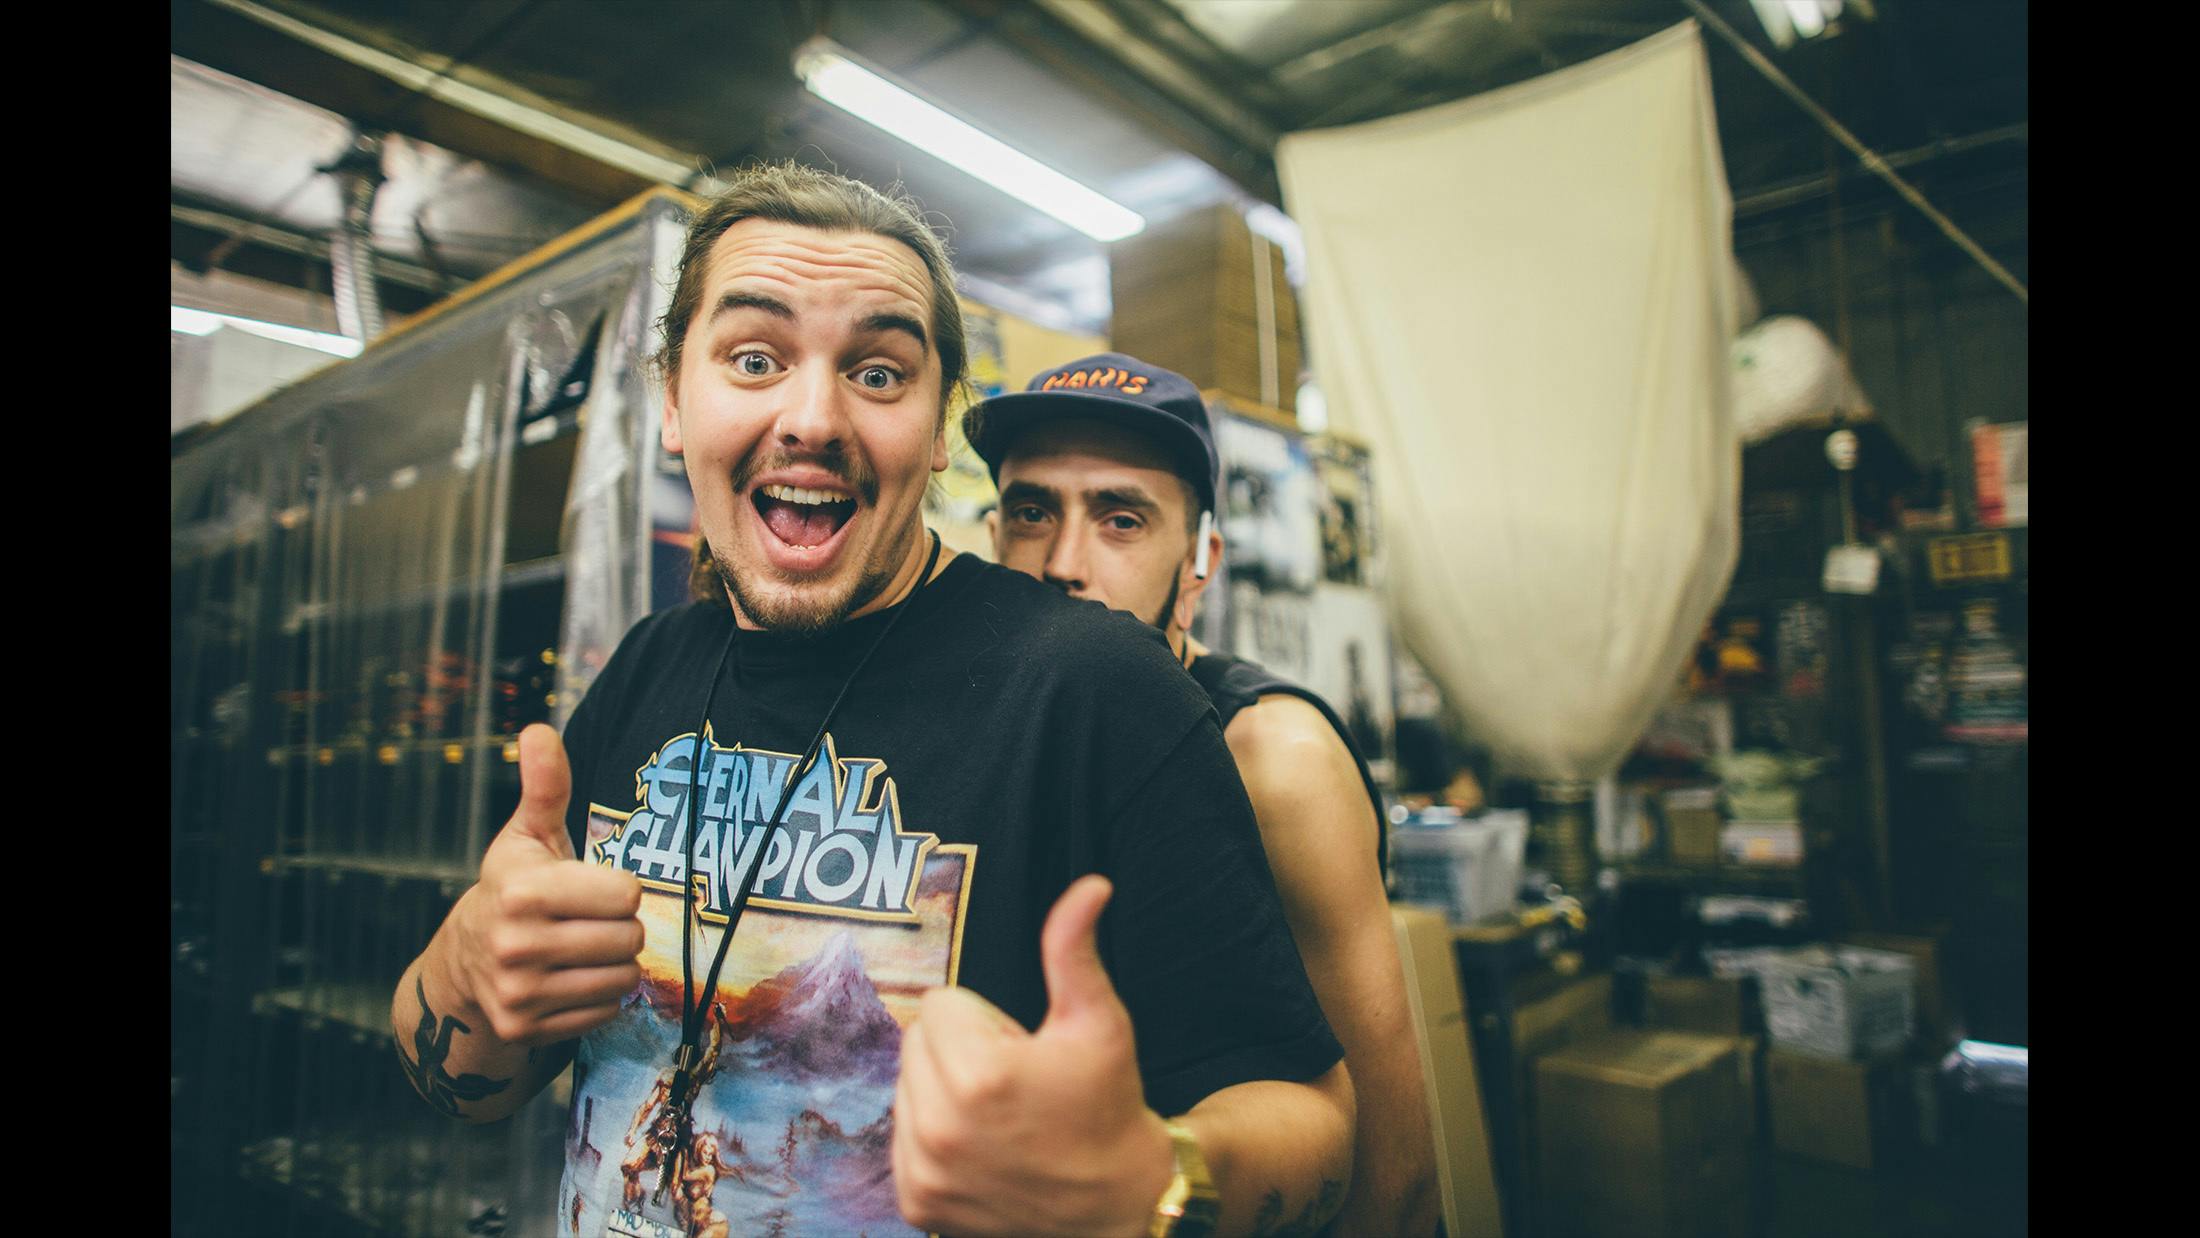 Max & Ethan in Revelation Records HQ. It was very cool to have the opportunity to go and look around the place, as you can tell everyone was very happy about it.